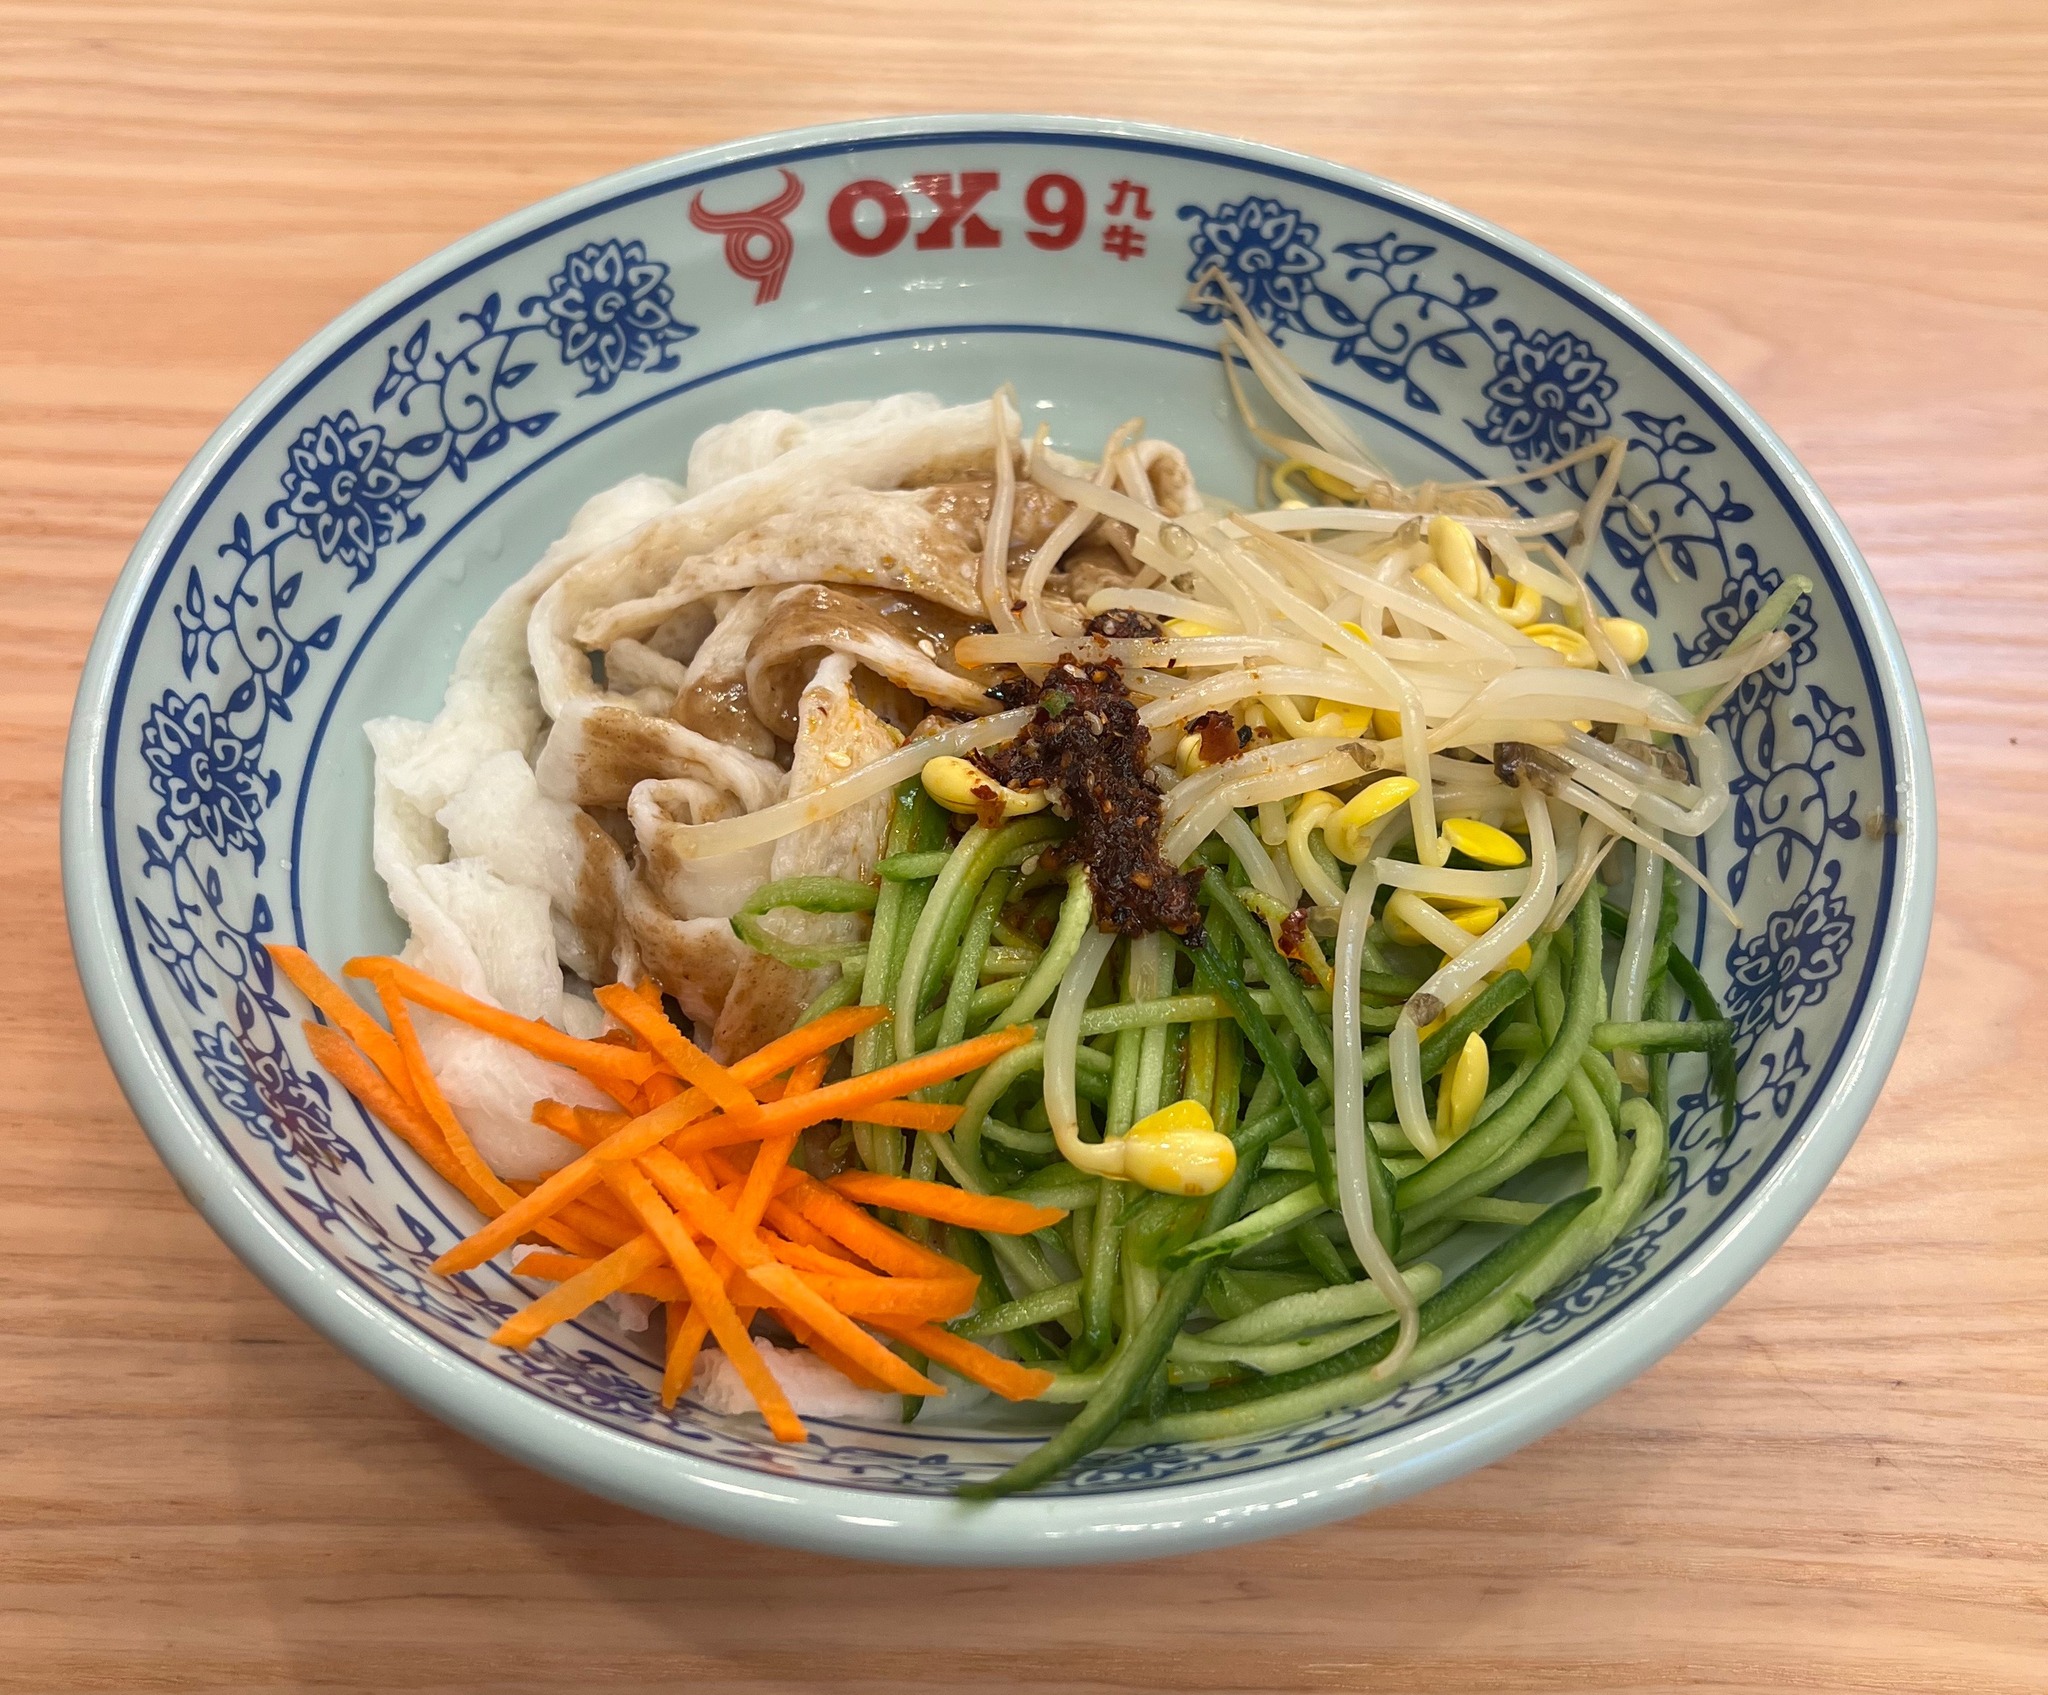 Ox 9 Lanzhou Hand Pulled Noodles